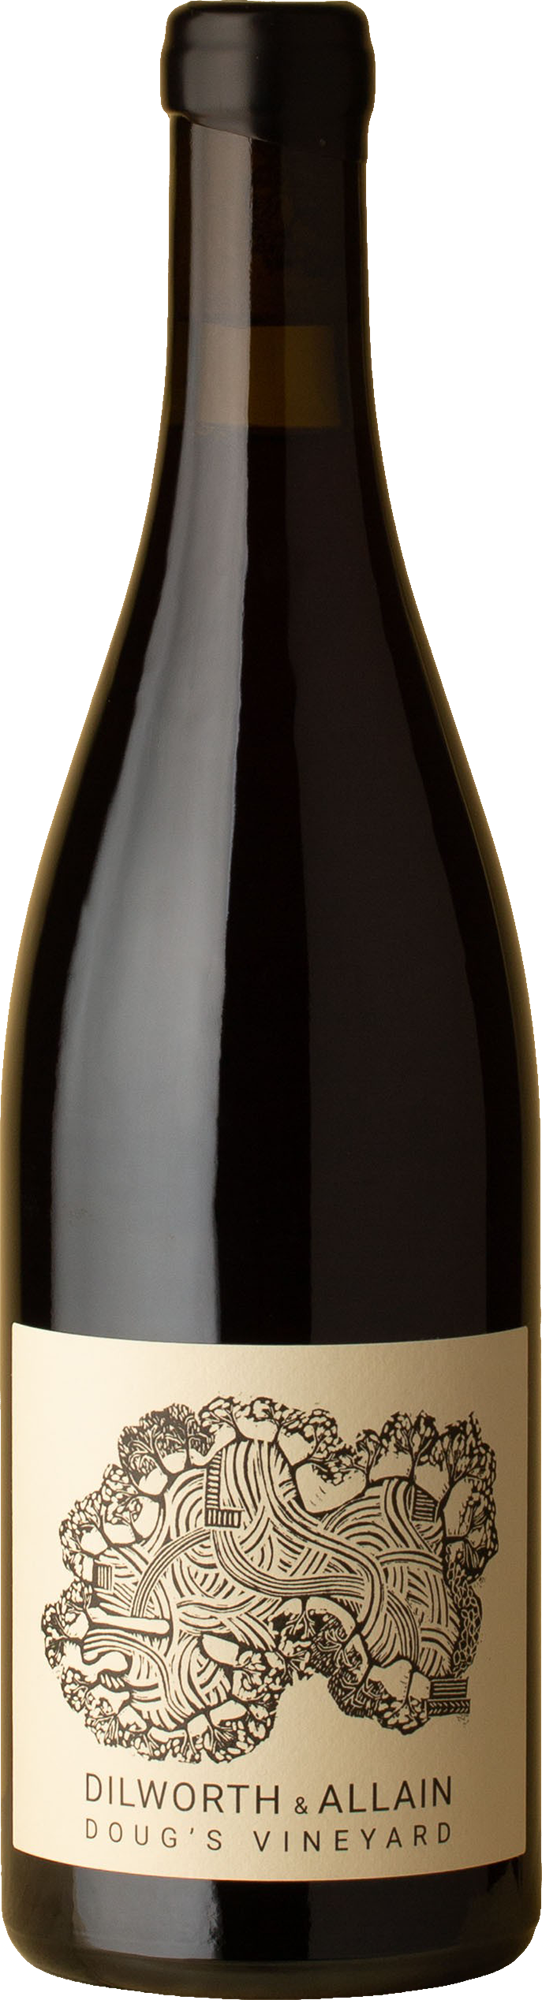 Dilworth and Allain - Doug's Vineyard Pinot Noir 2020 Red Wine